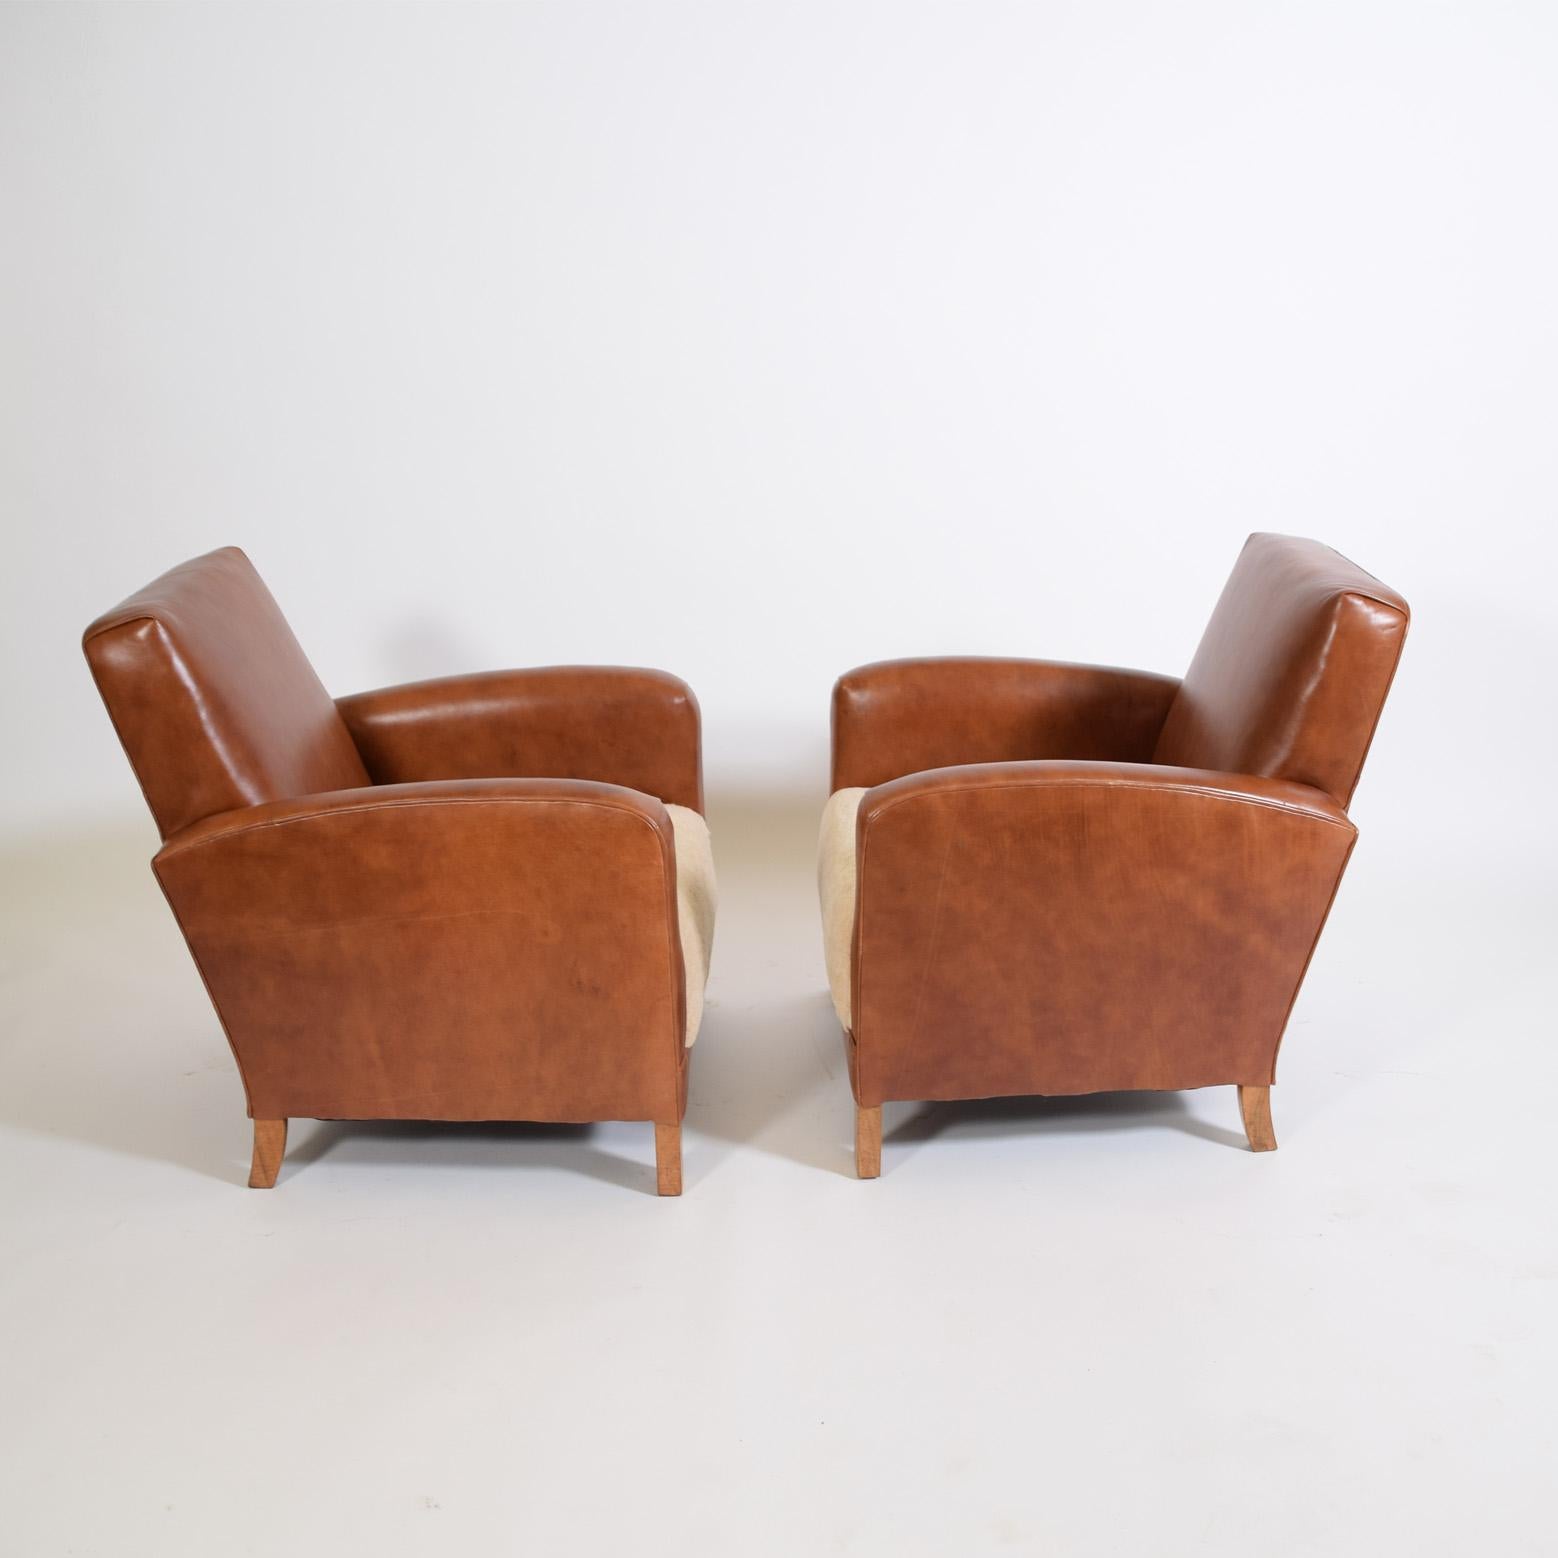 Danish Art Deco Lounge Chairs 1930's In Good Condition For Sale In Hudson, NY